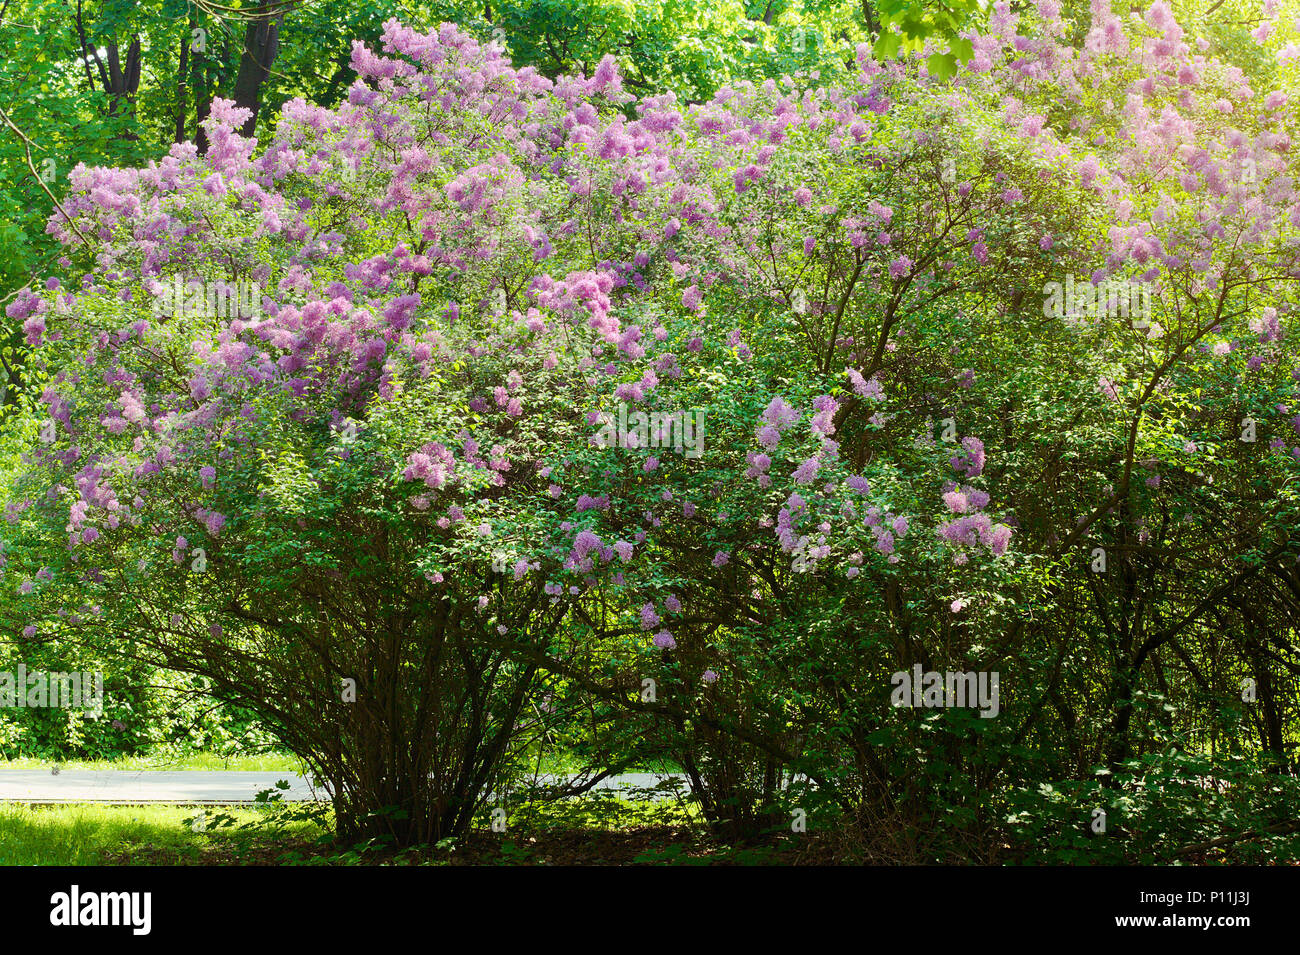 Lilac or common lilac, Syringa vulgaris in blossom. Purple flowers growing on lilac blooming shrub in park. Springtime in the garden. Poland. Stock Photo